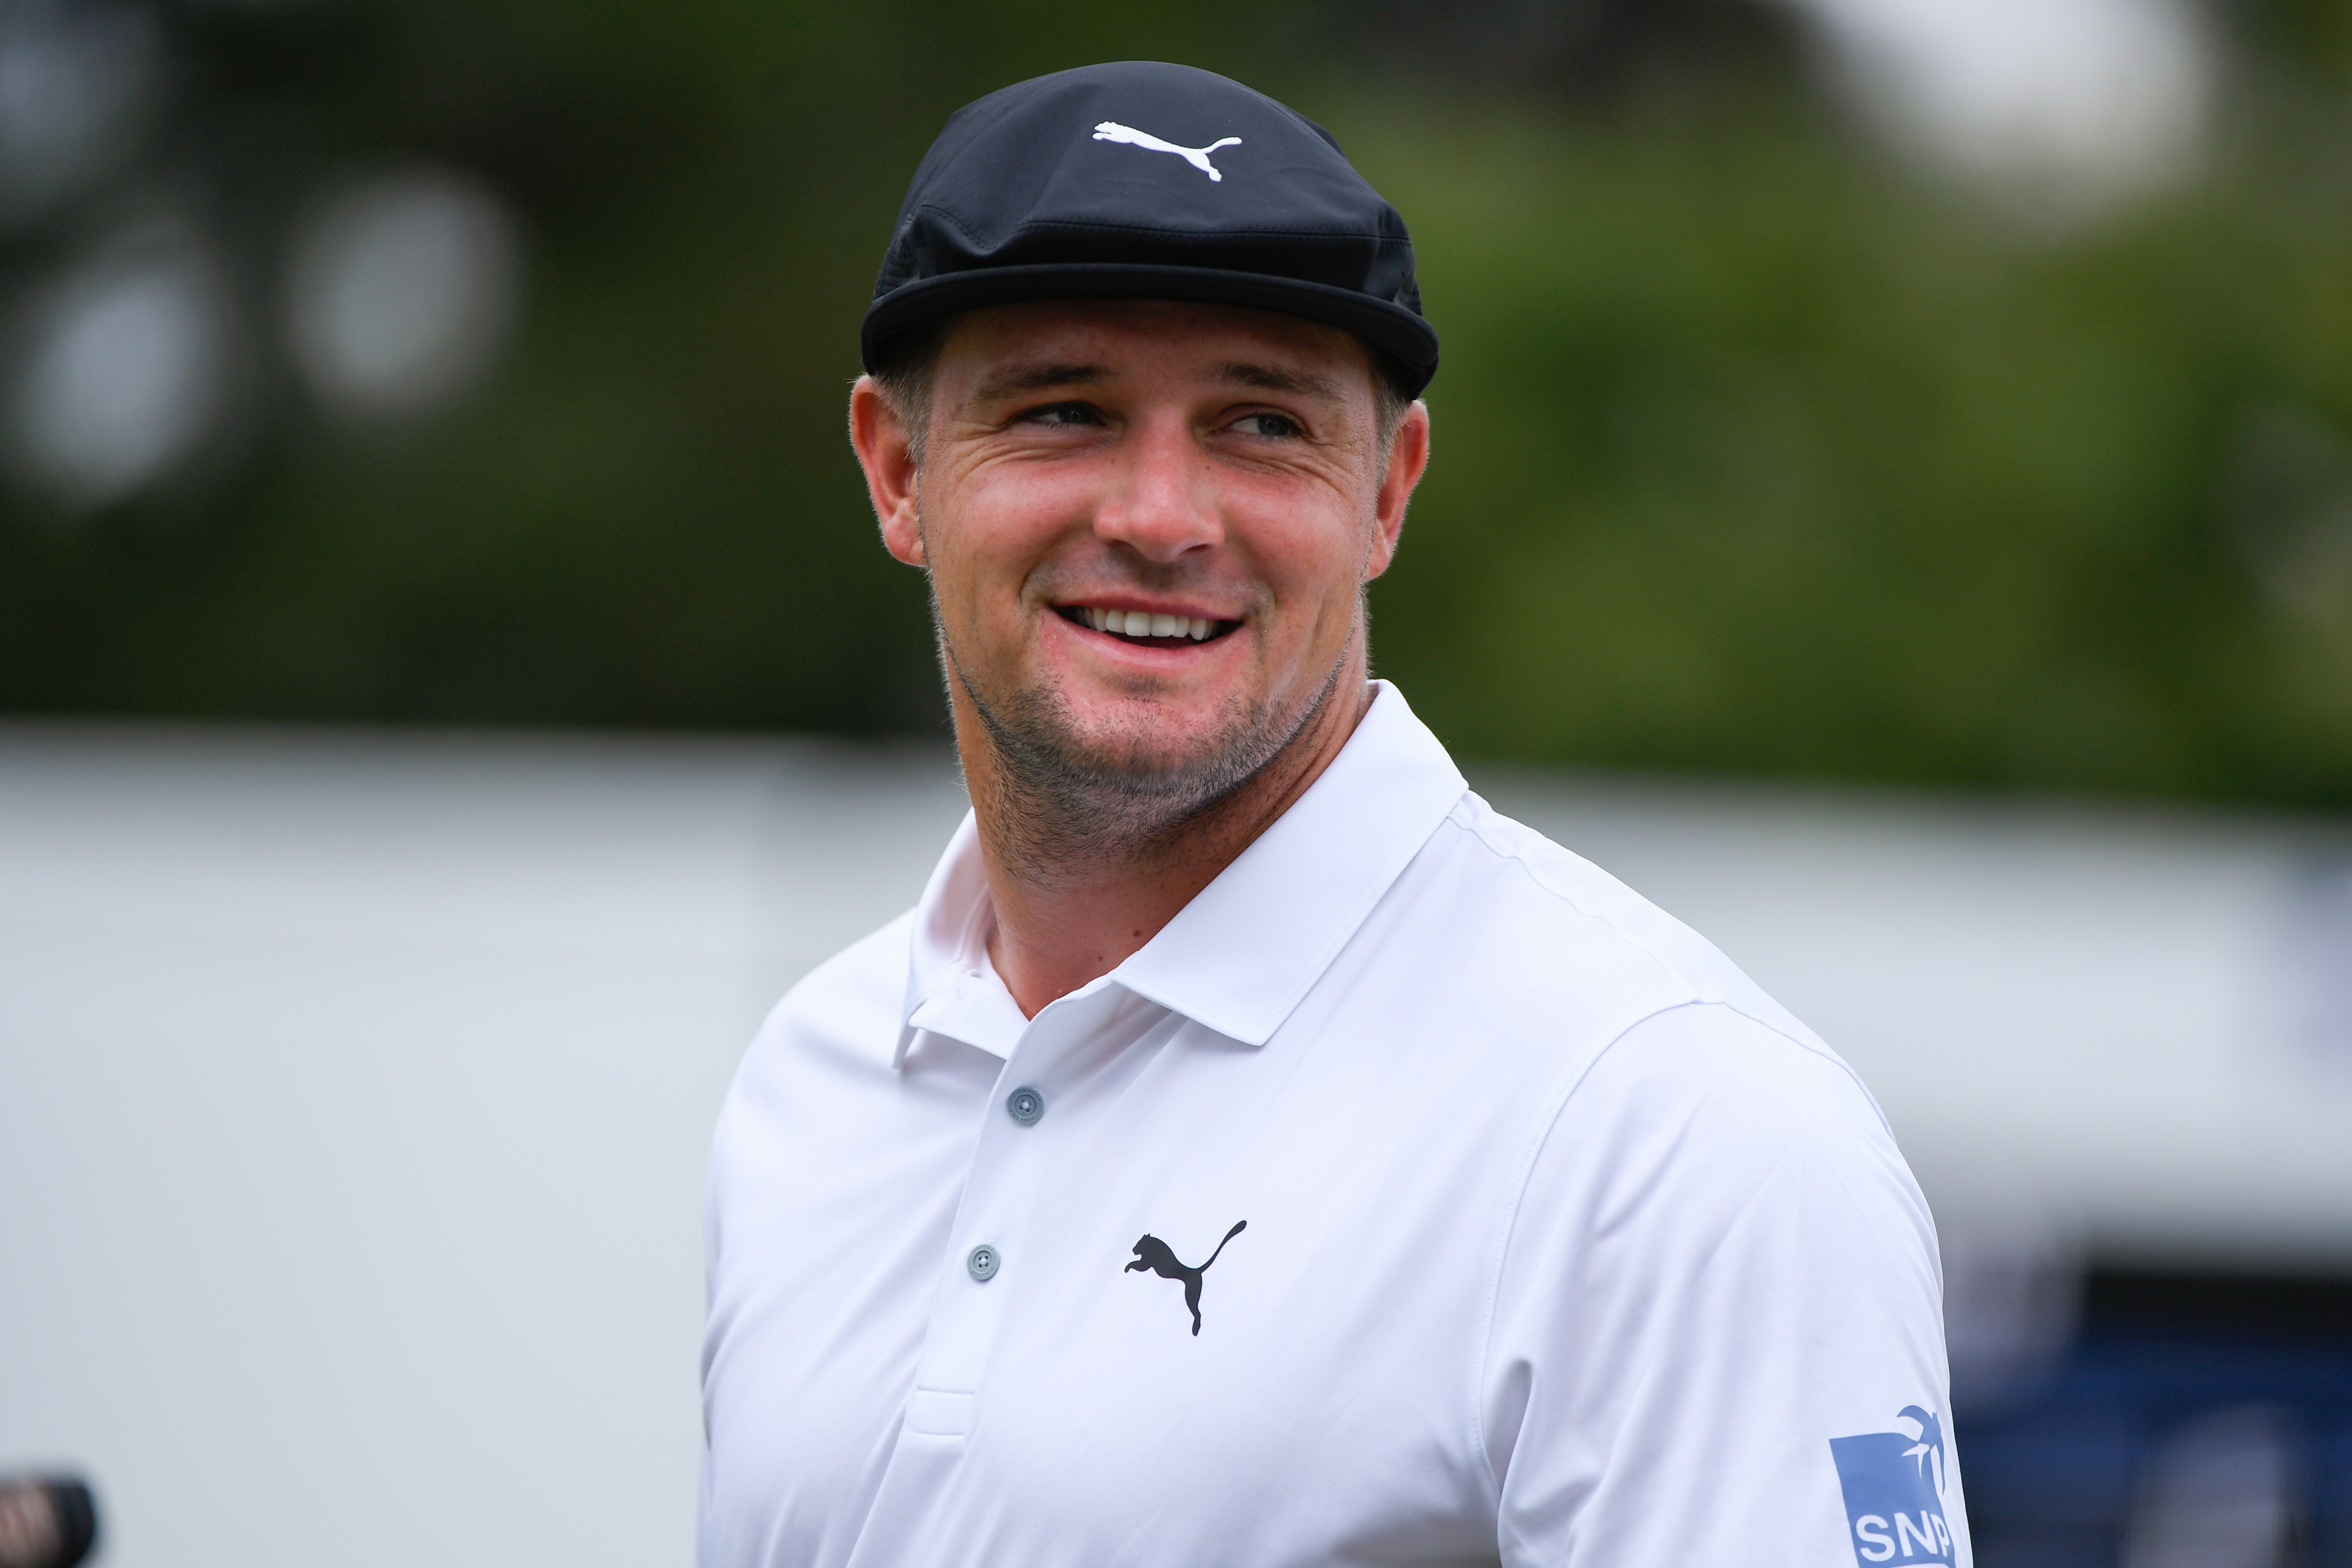 Bryson DeChambeau says his goal is to live to 130(!) or 140(!), gets mocked by Justin Thomas This is the Loop GolfDigest